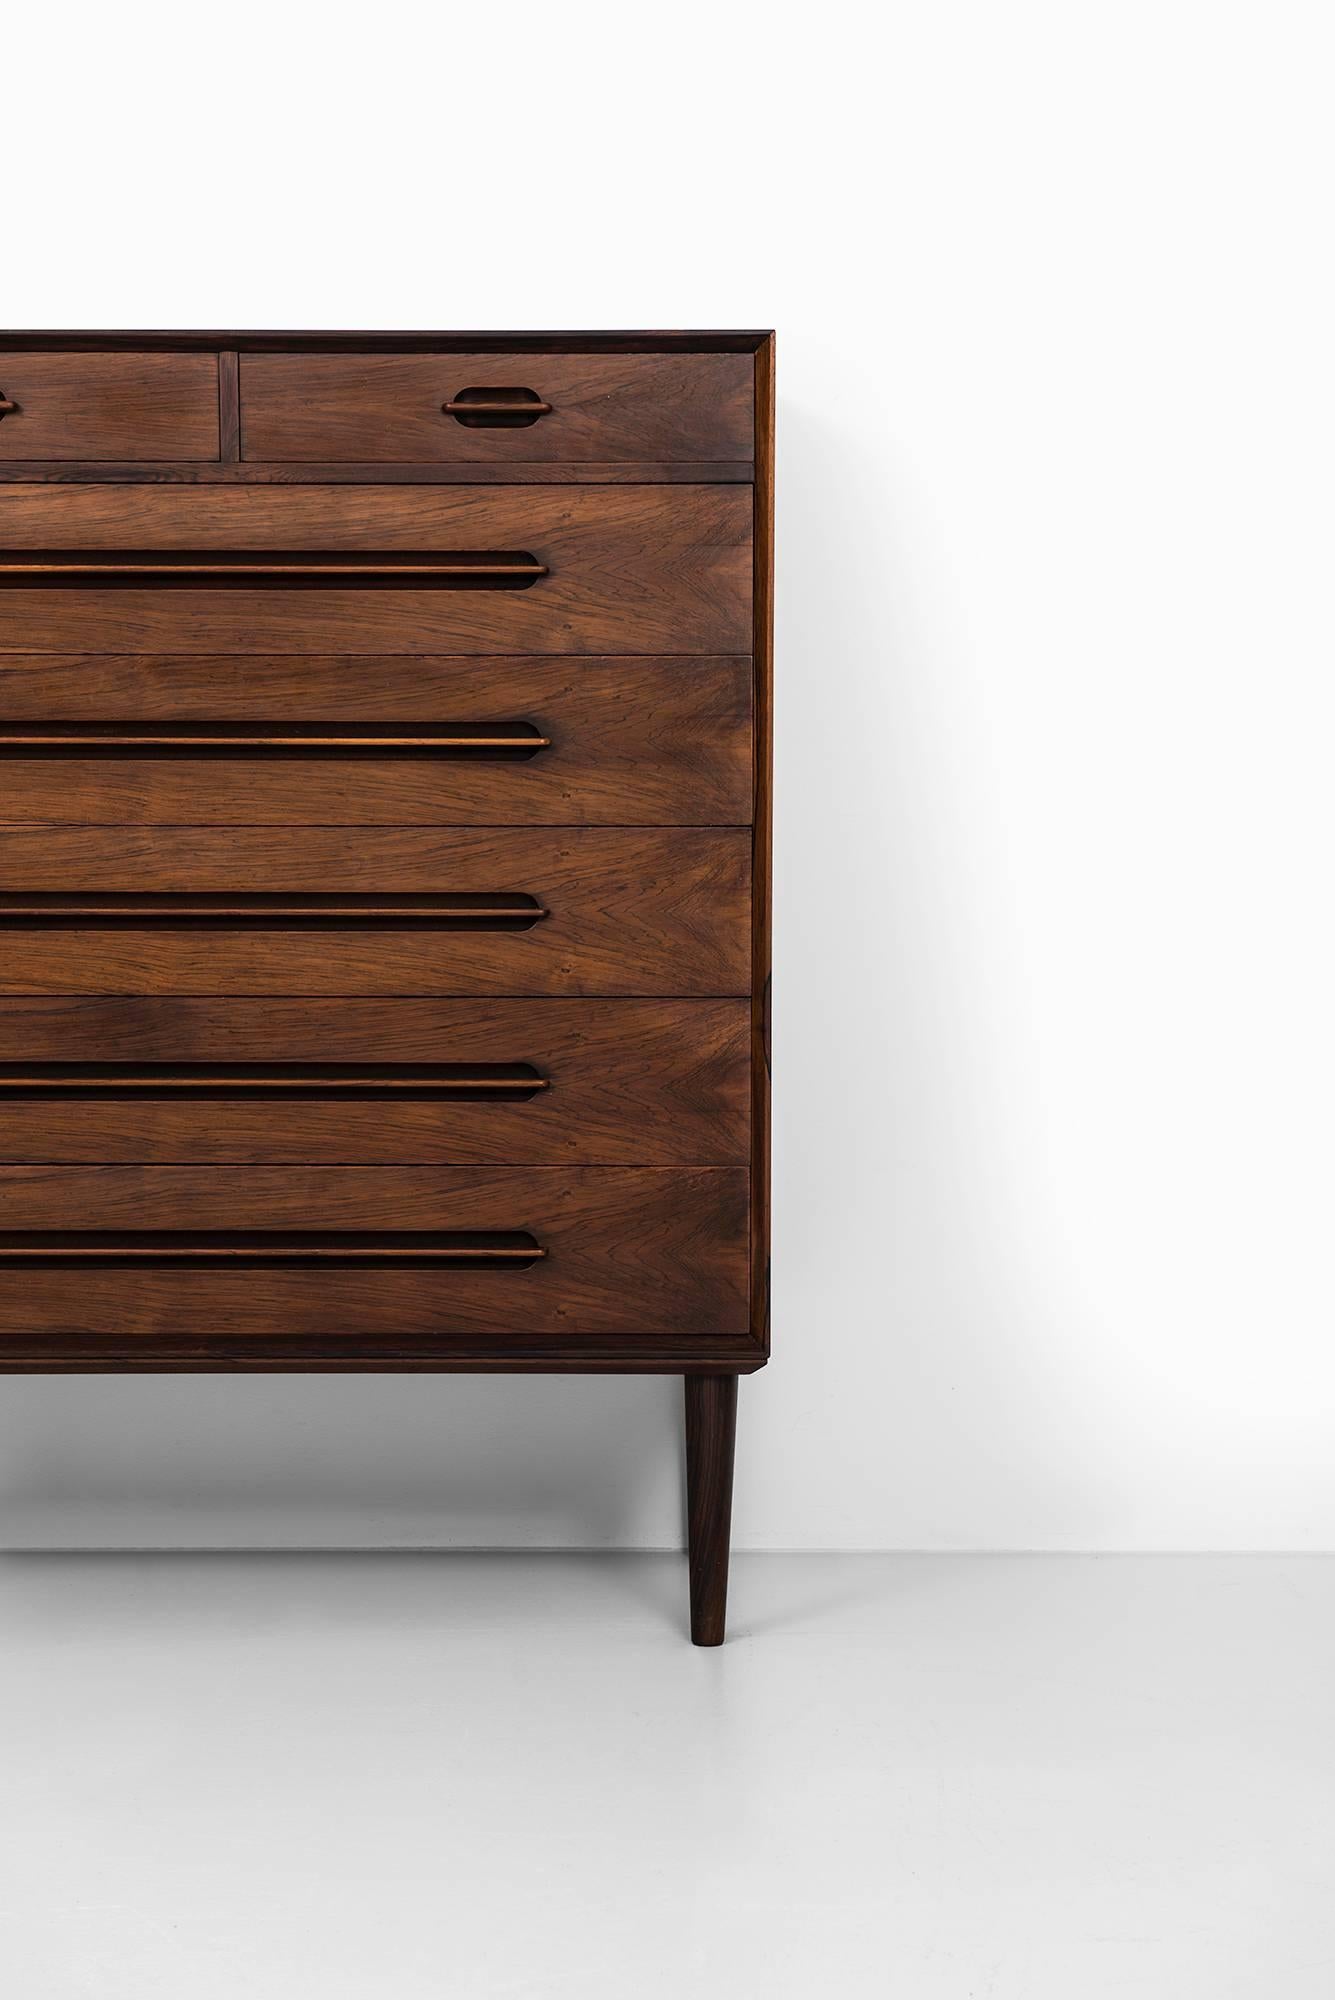 Very rare chest of drawers model 91 designed by Ejvind A. Johansson. Produced by Gern møbelfabrik in Denmark.